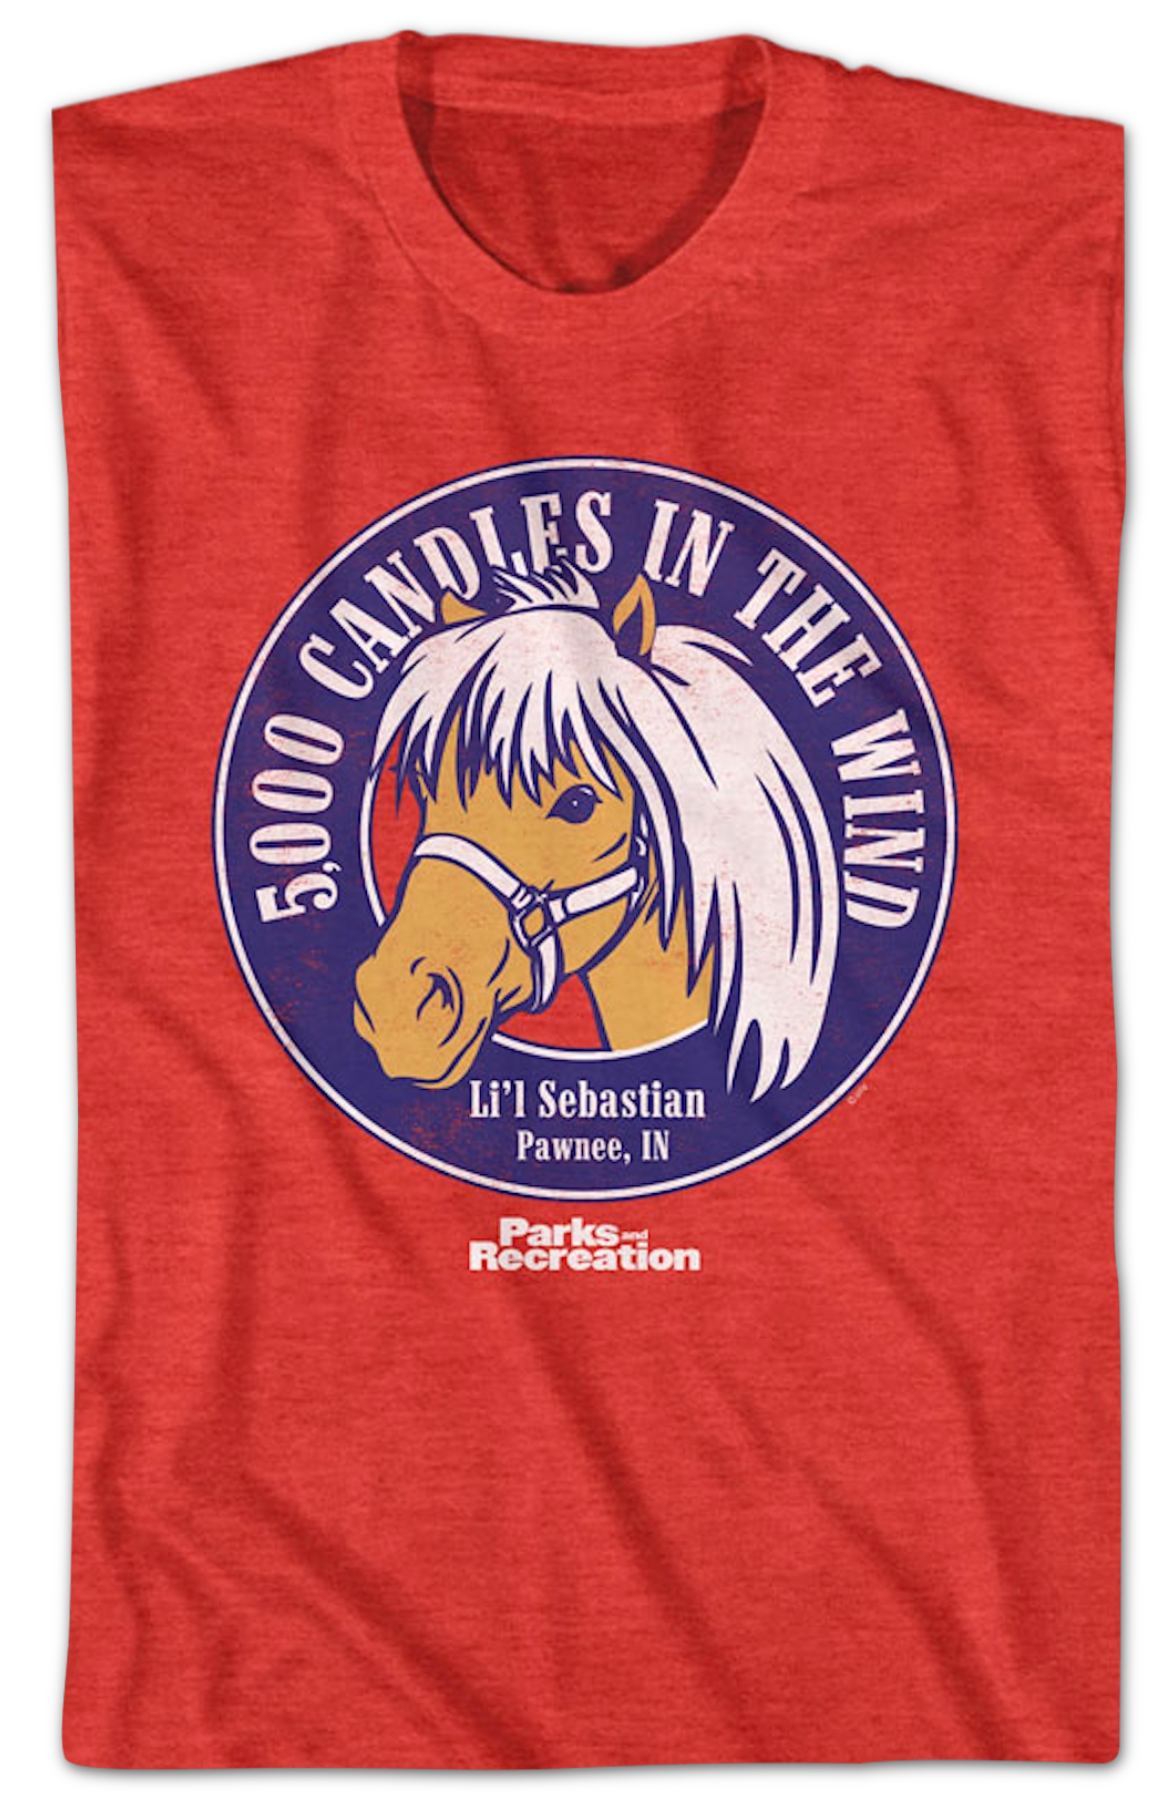 5,000 Candles in the Wind Parks and Recreation T-Shirt